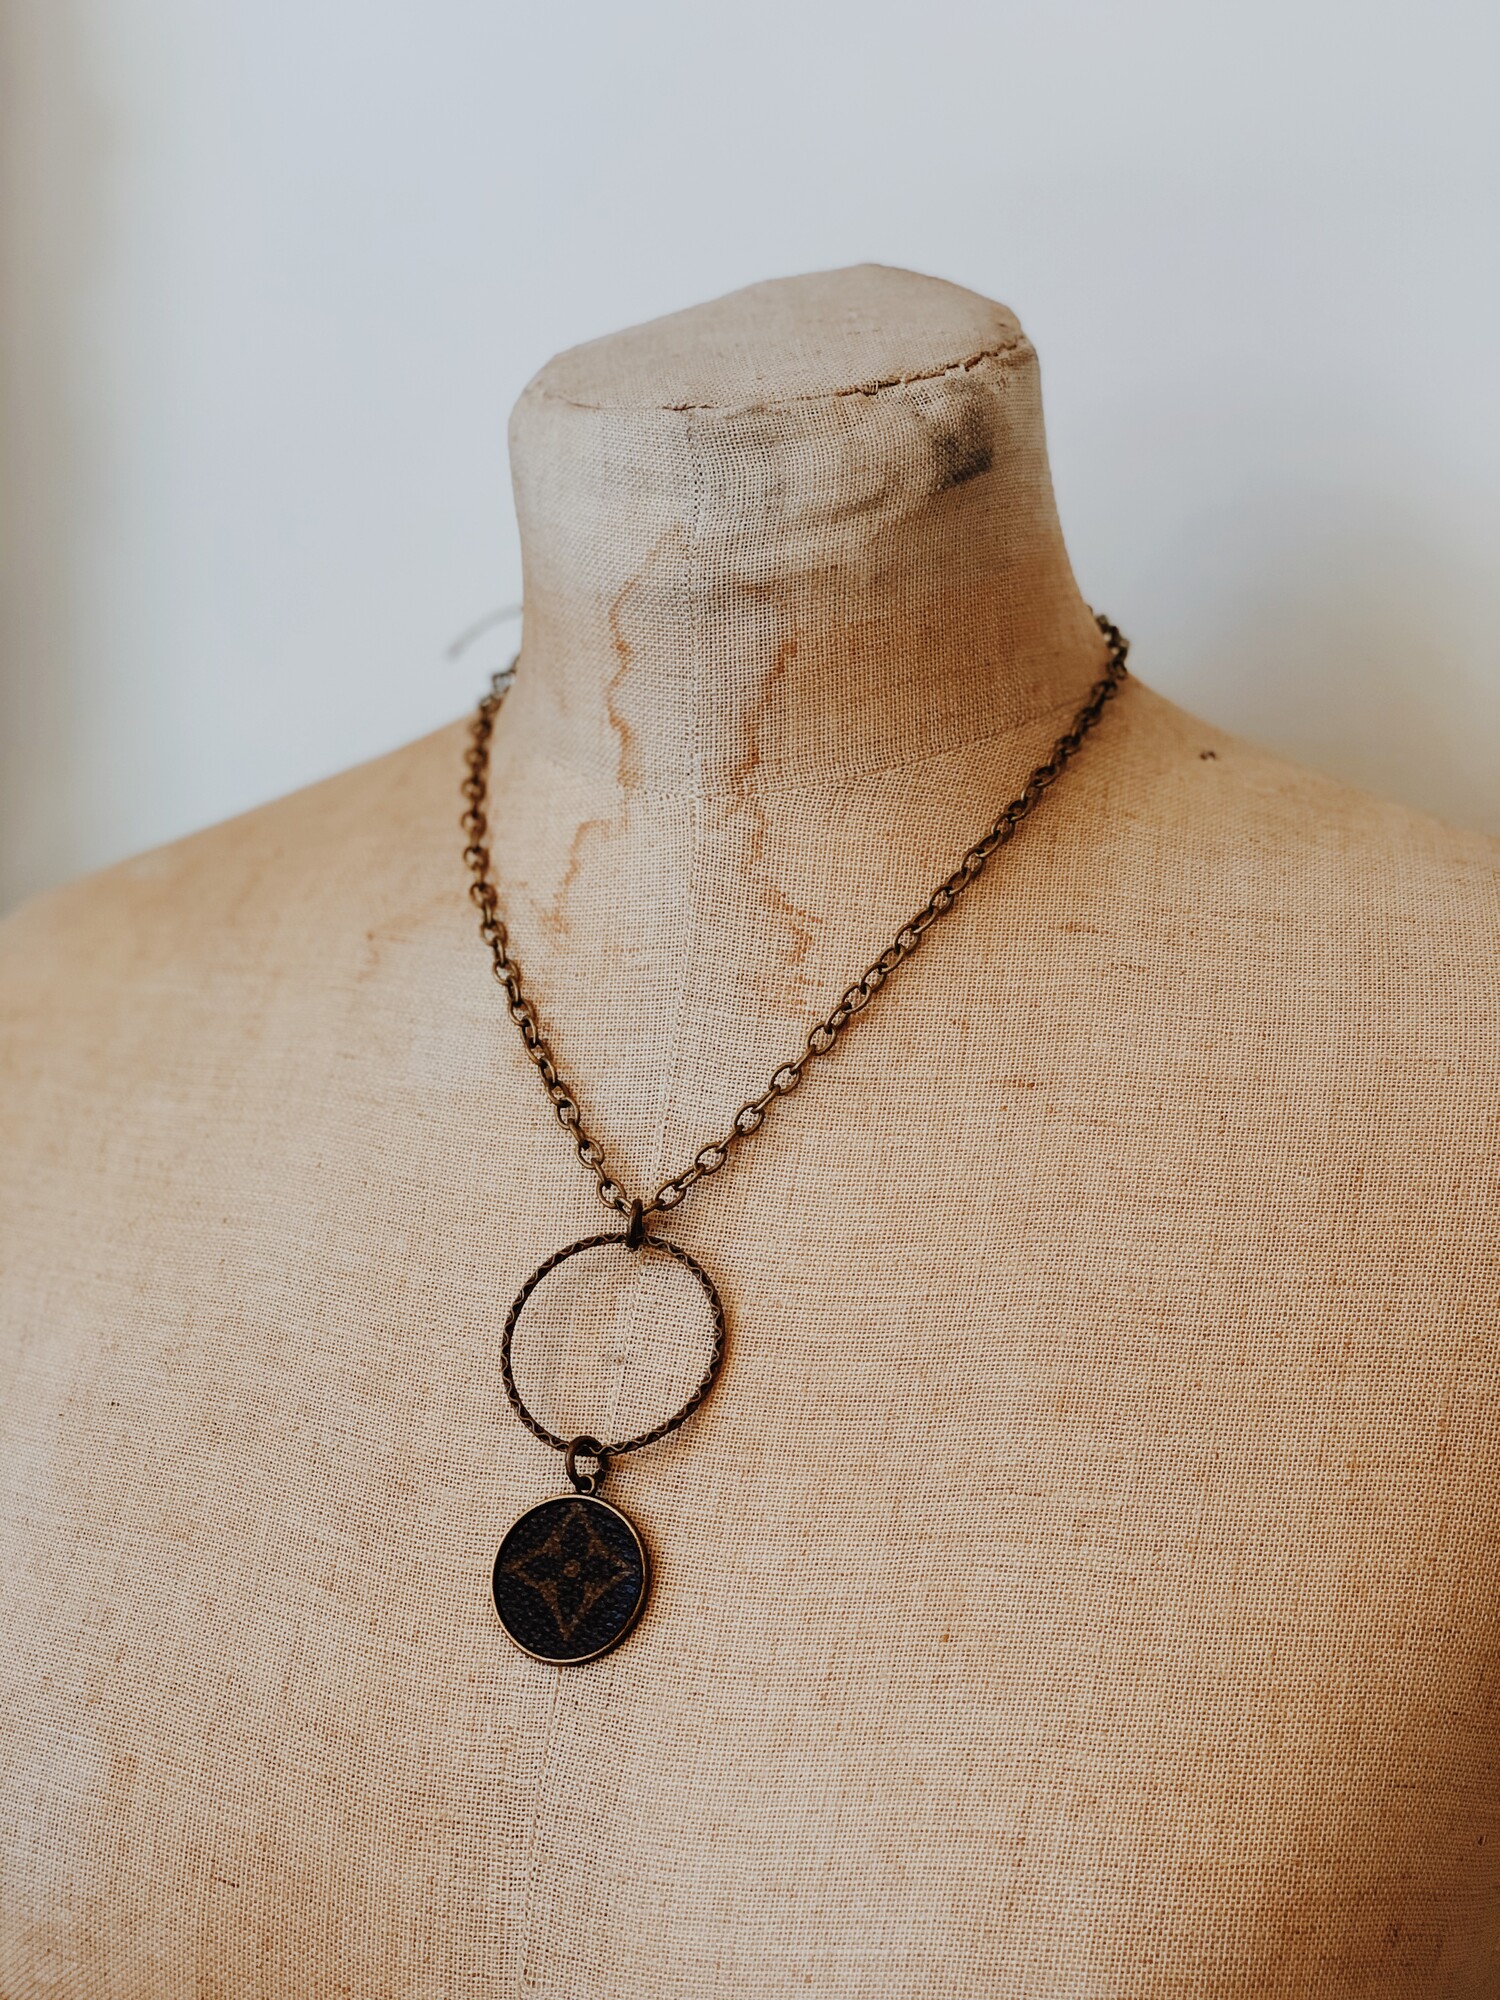 upcycled louis vuitton jewelry